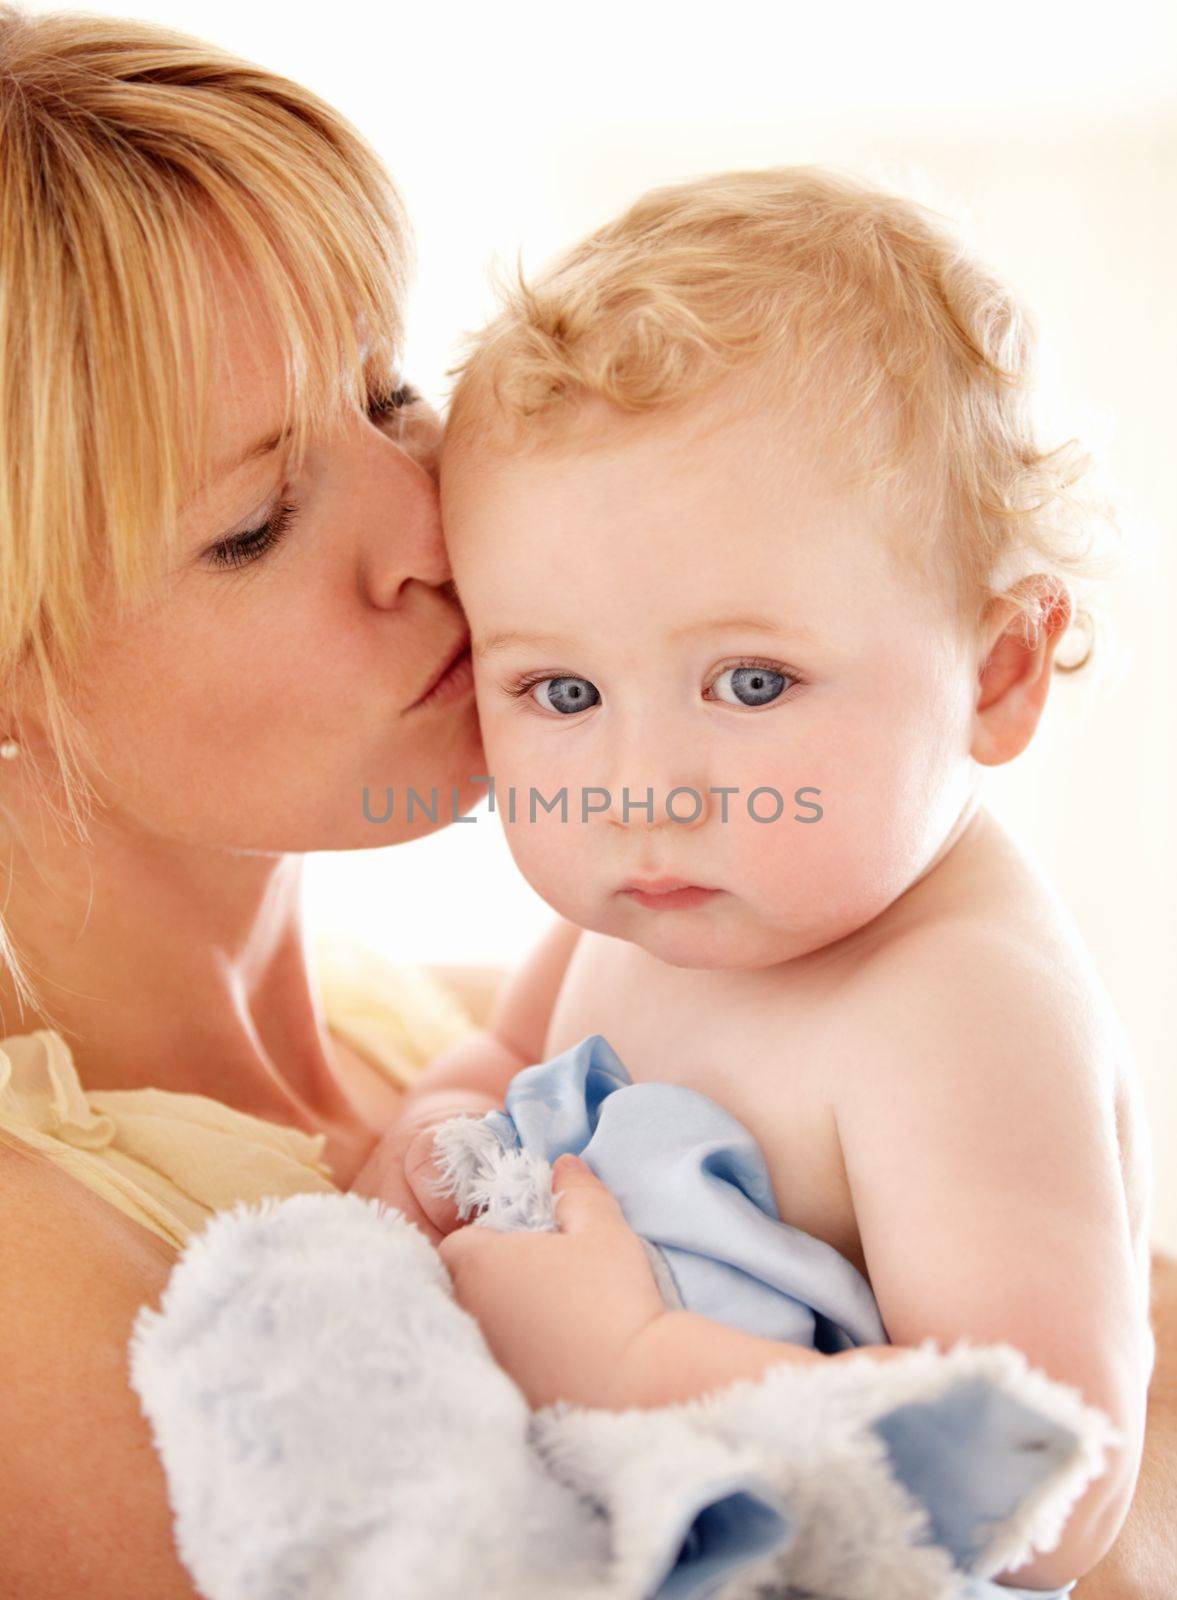 Hes such a precious gift - Motherhood. Cute baby boy being held and kissed by his mother